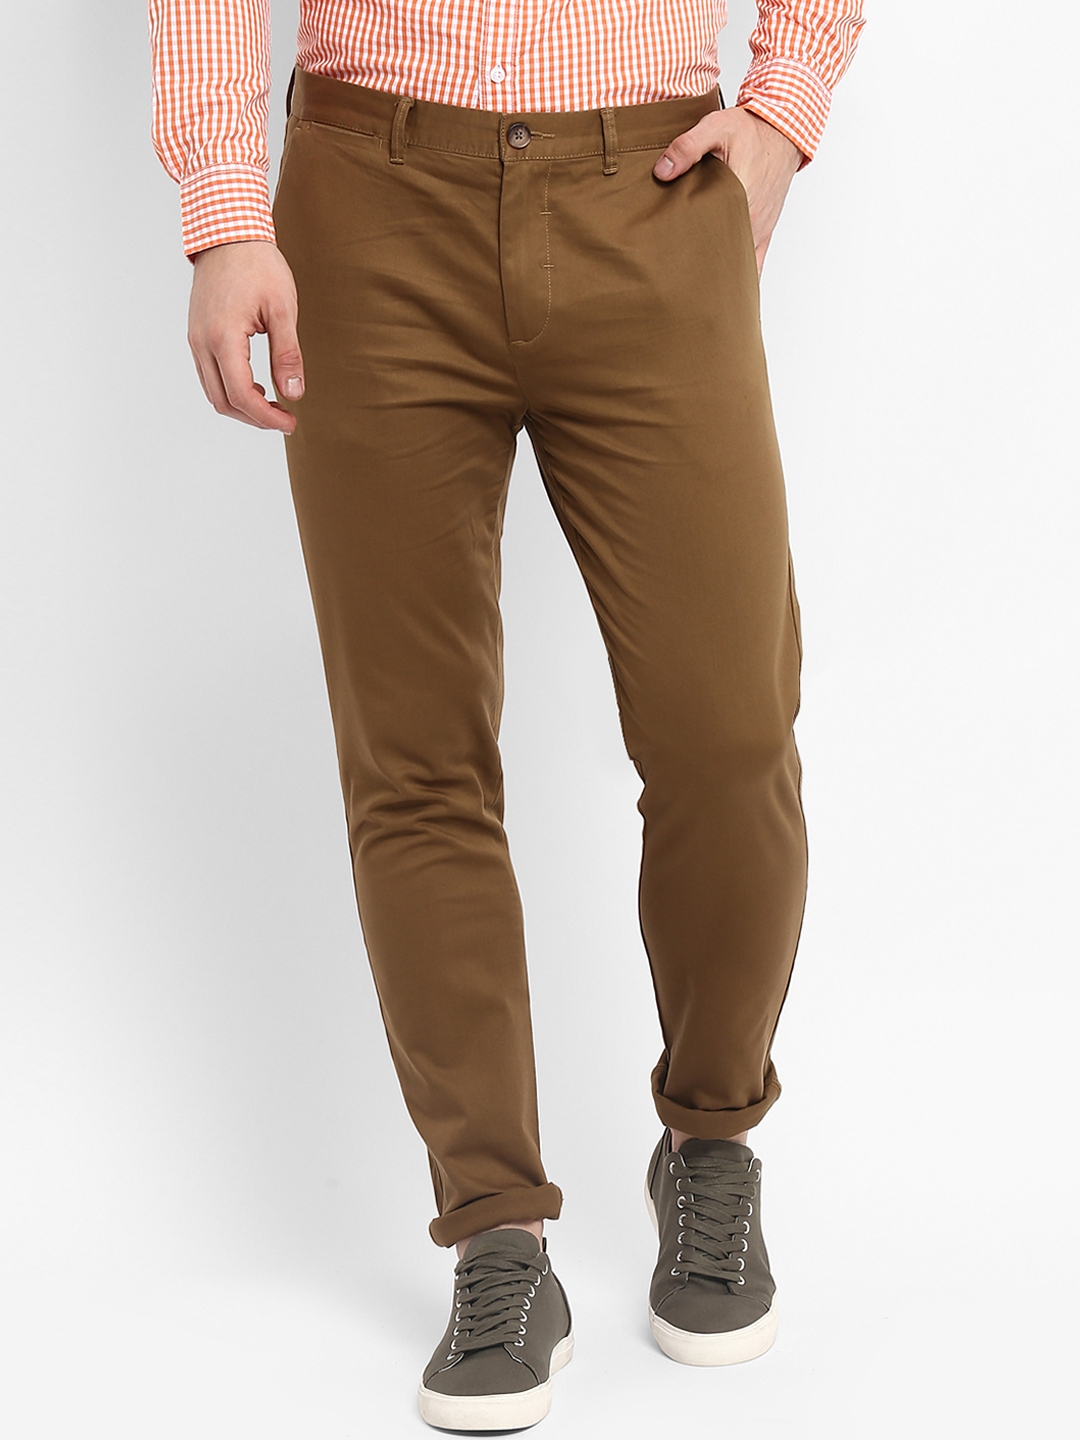 Buy Grey Trousers  Pants for Men by RED TAPE Online  Ajiocom